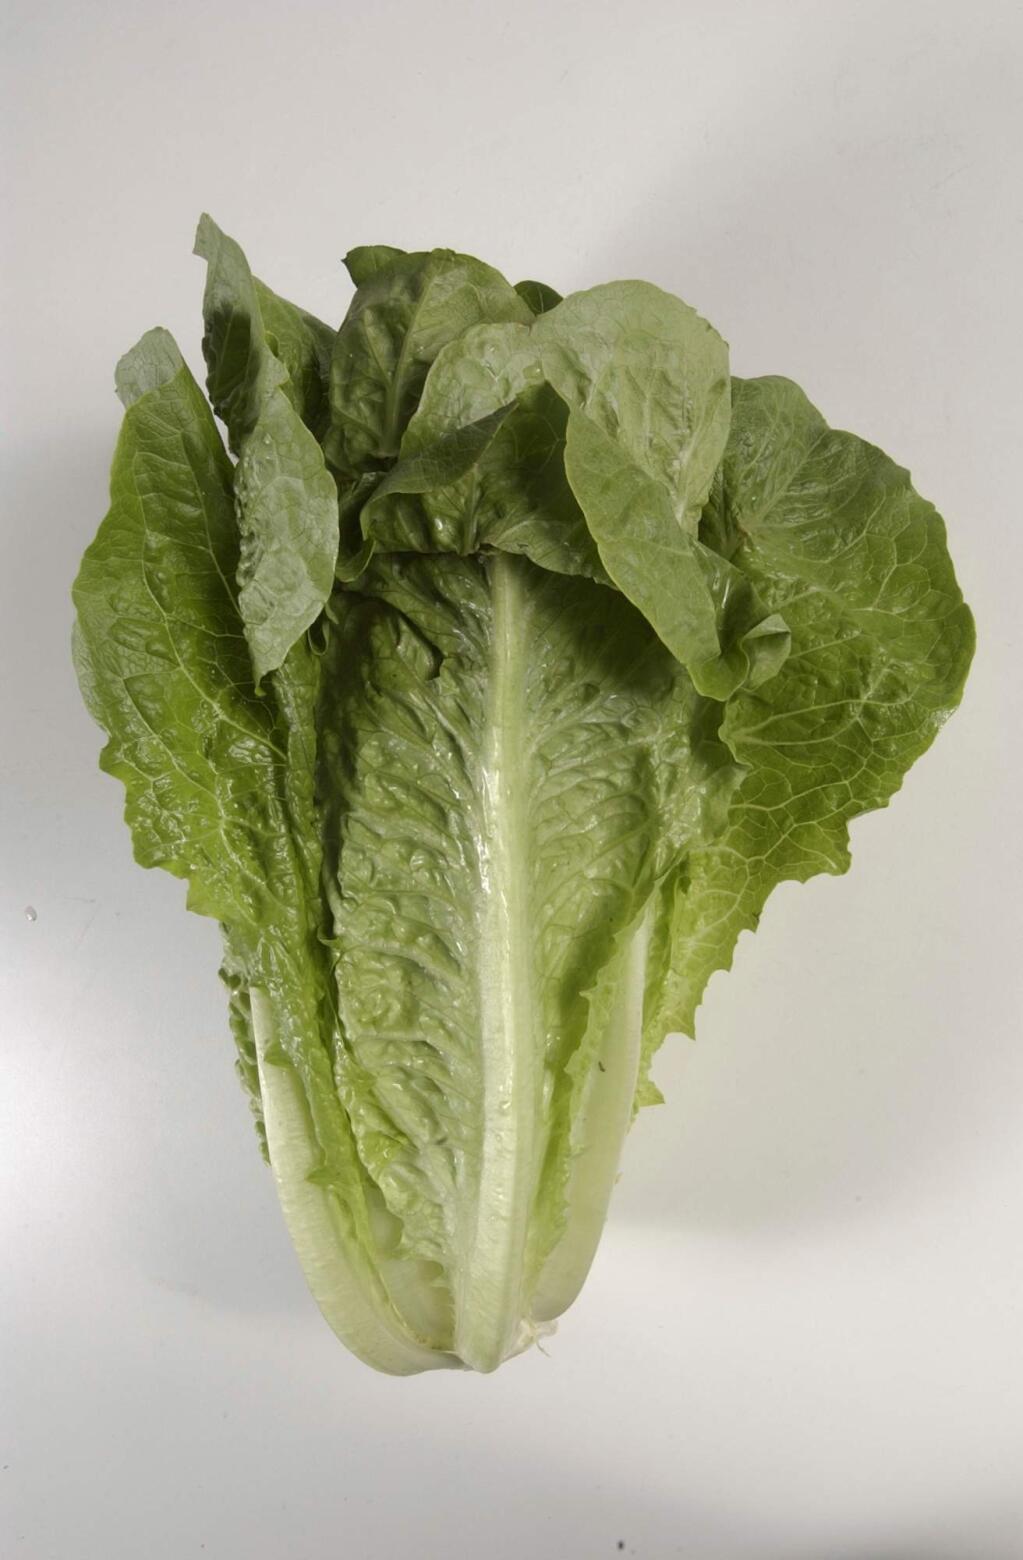 FILE - This undated photo shows romaine lettuce in Houston. On Wednesday, May 2, 2018, U.S. health officials said California reported the first death in a national food poisoning outbreak linked to romaine lettuce. (Steve Campbell/Houston Chronicle via AP)